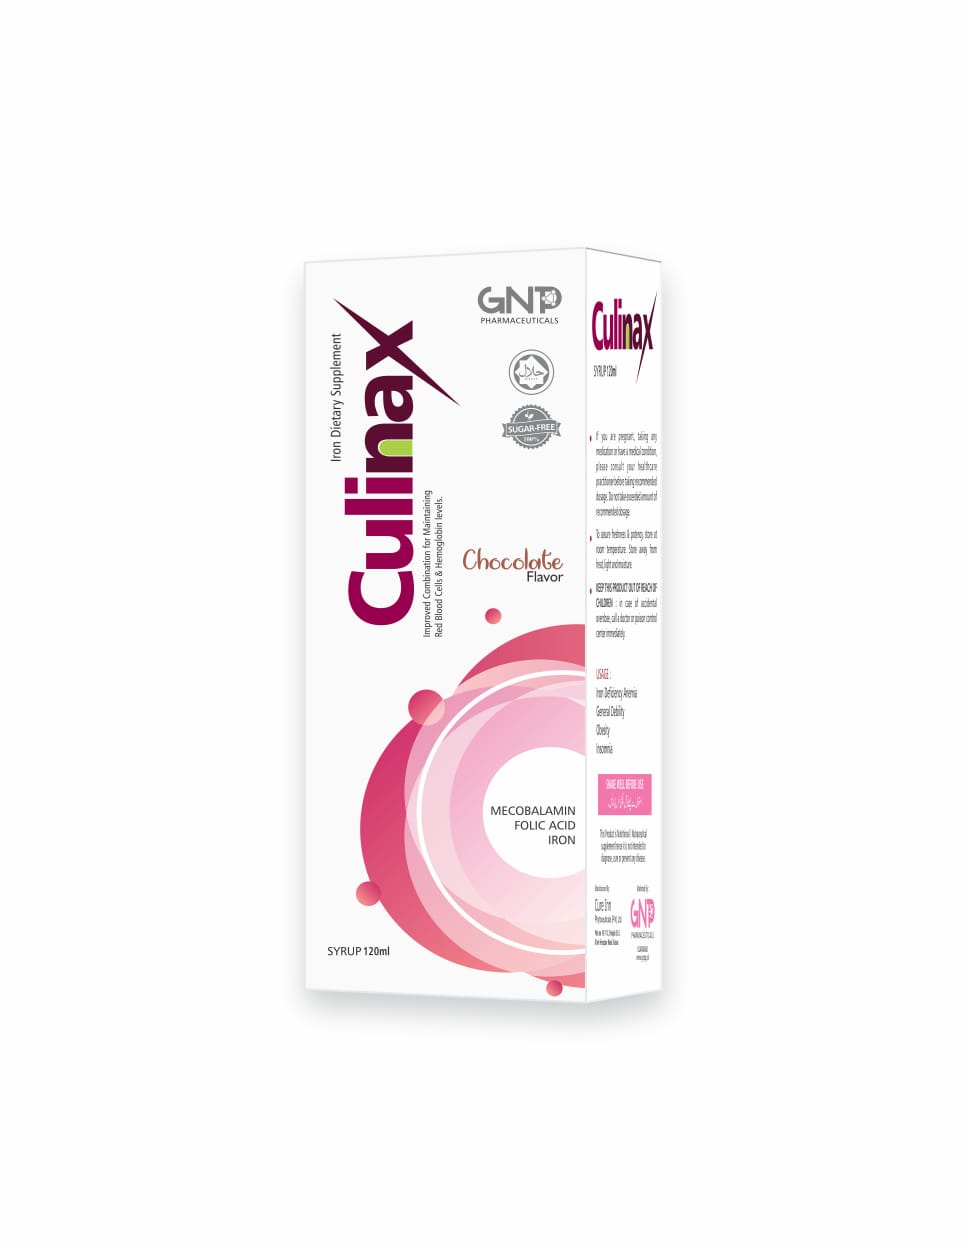 Culinax Syrup is a natural supplement to Improve Red Blood Cells and Hemoglobin levels